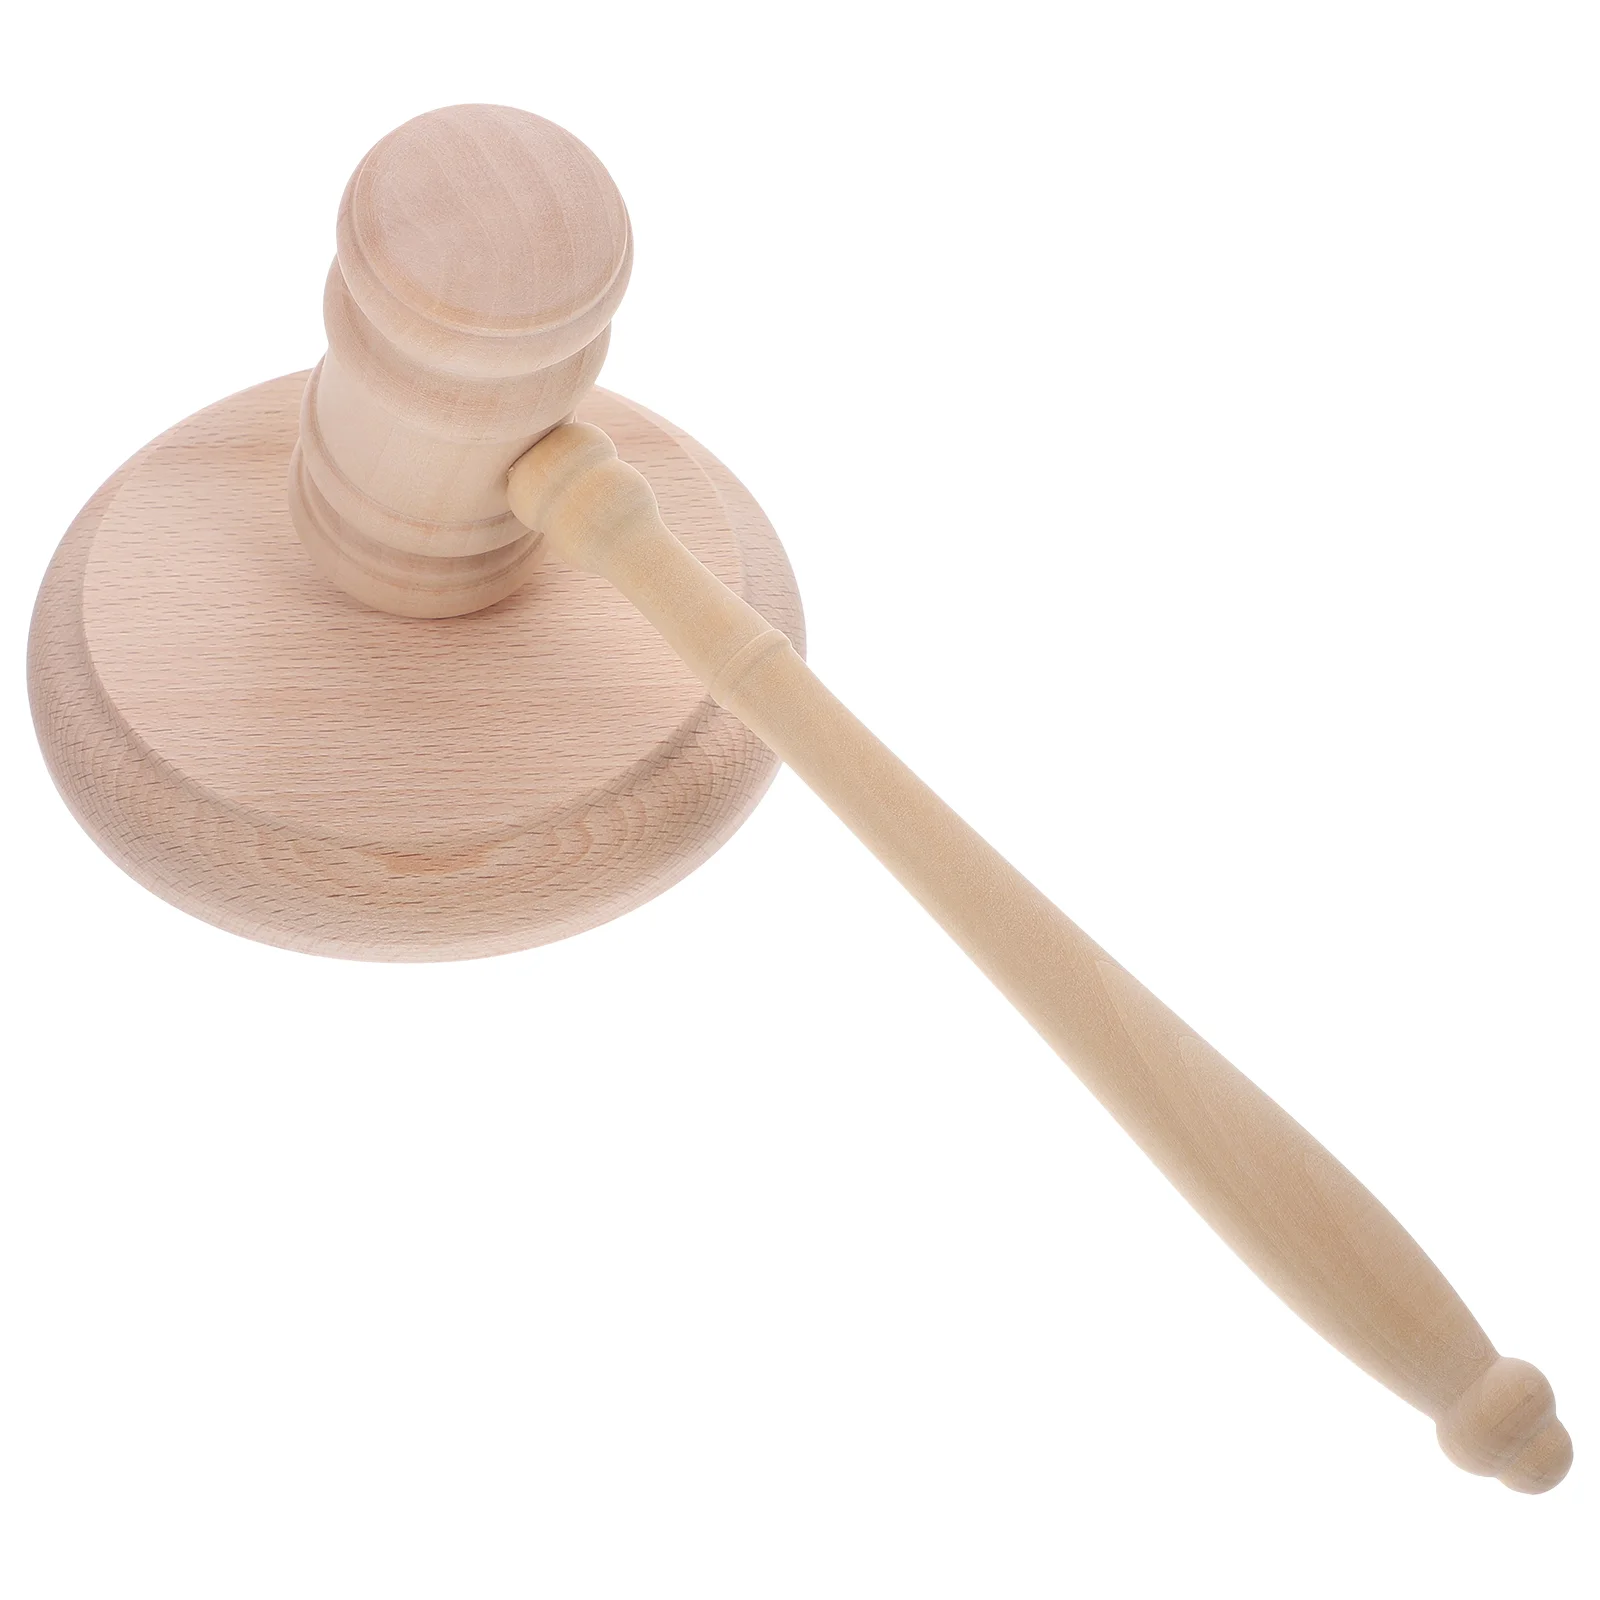 

Judge Hammer Hammers Auction Sale Gavel Props Log Gavels Wood for Accessory Court Judge's